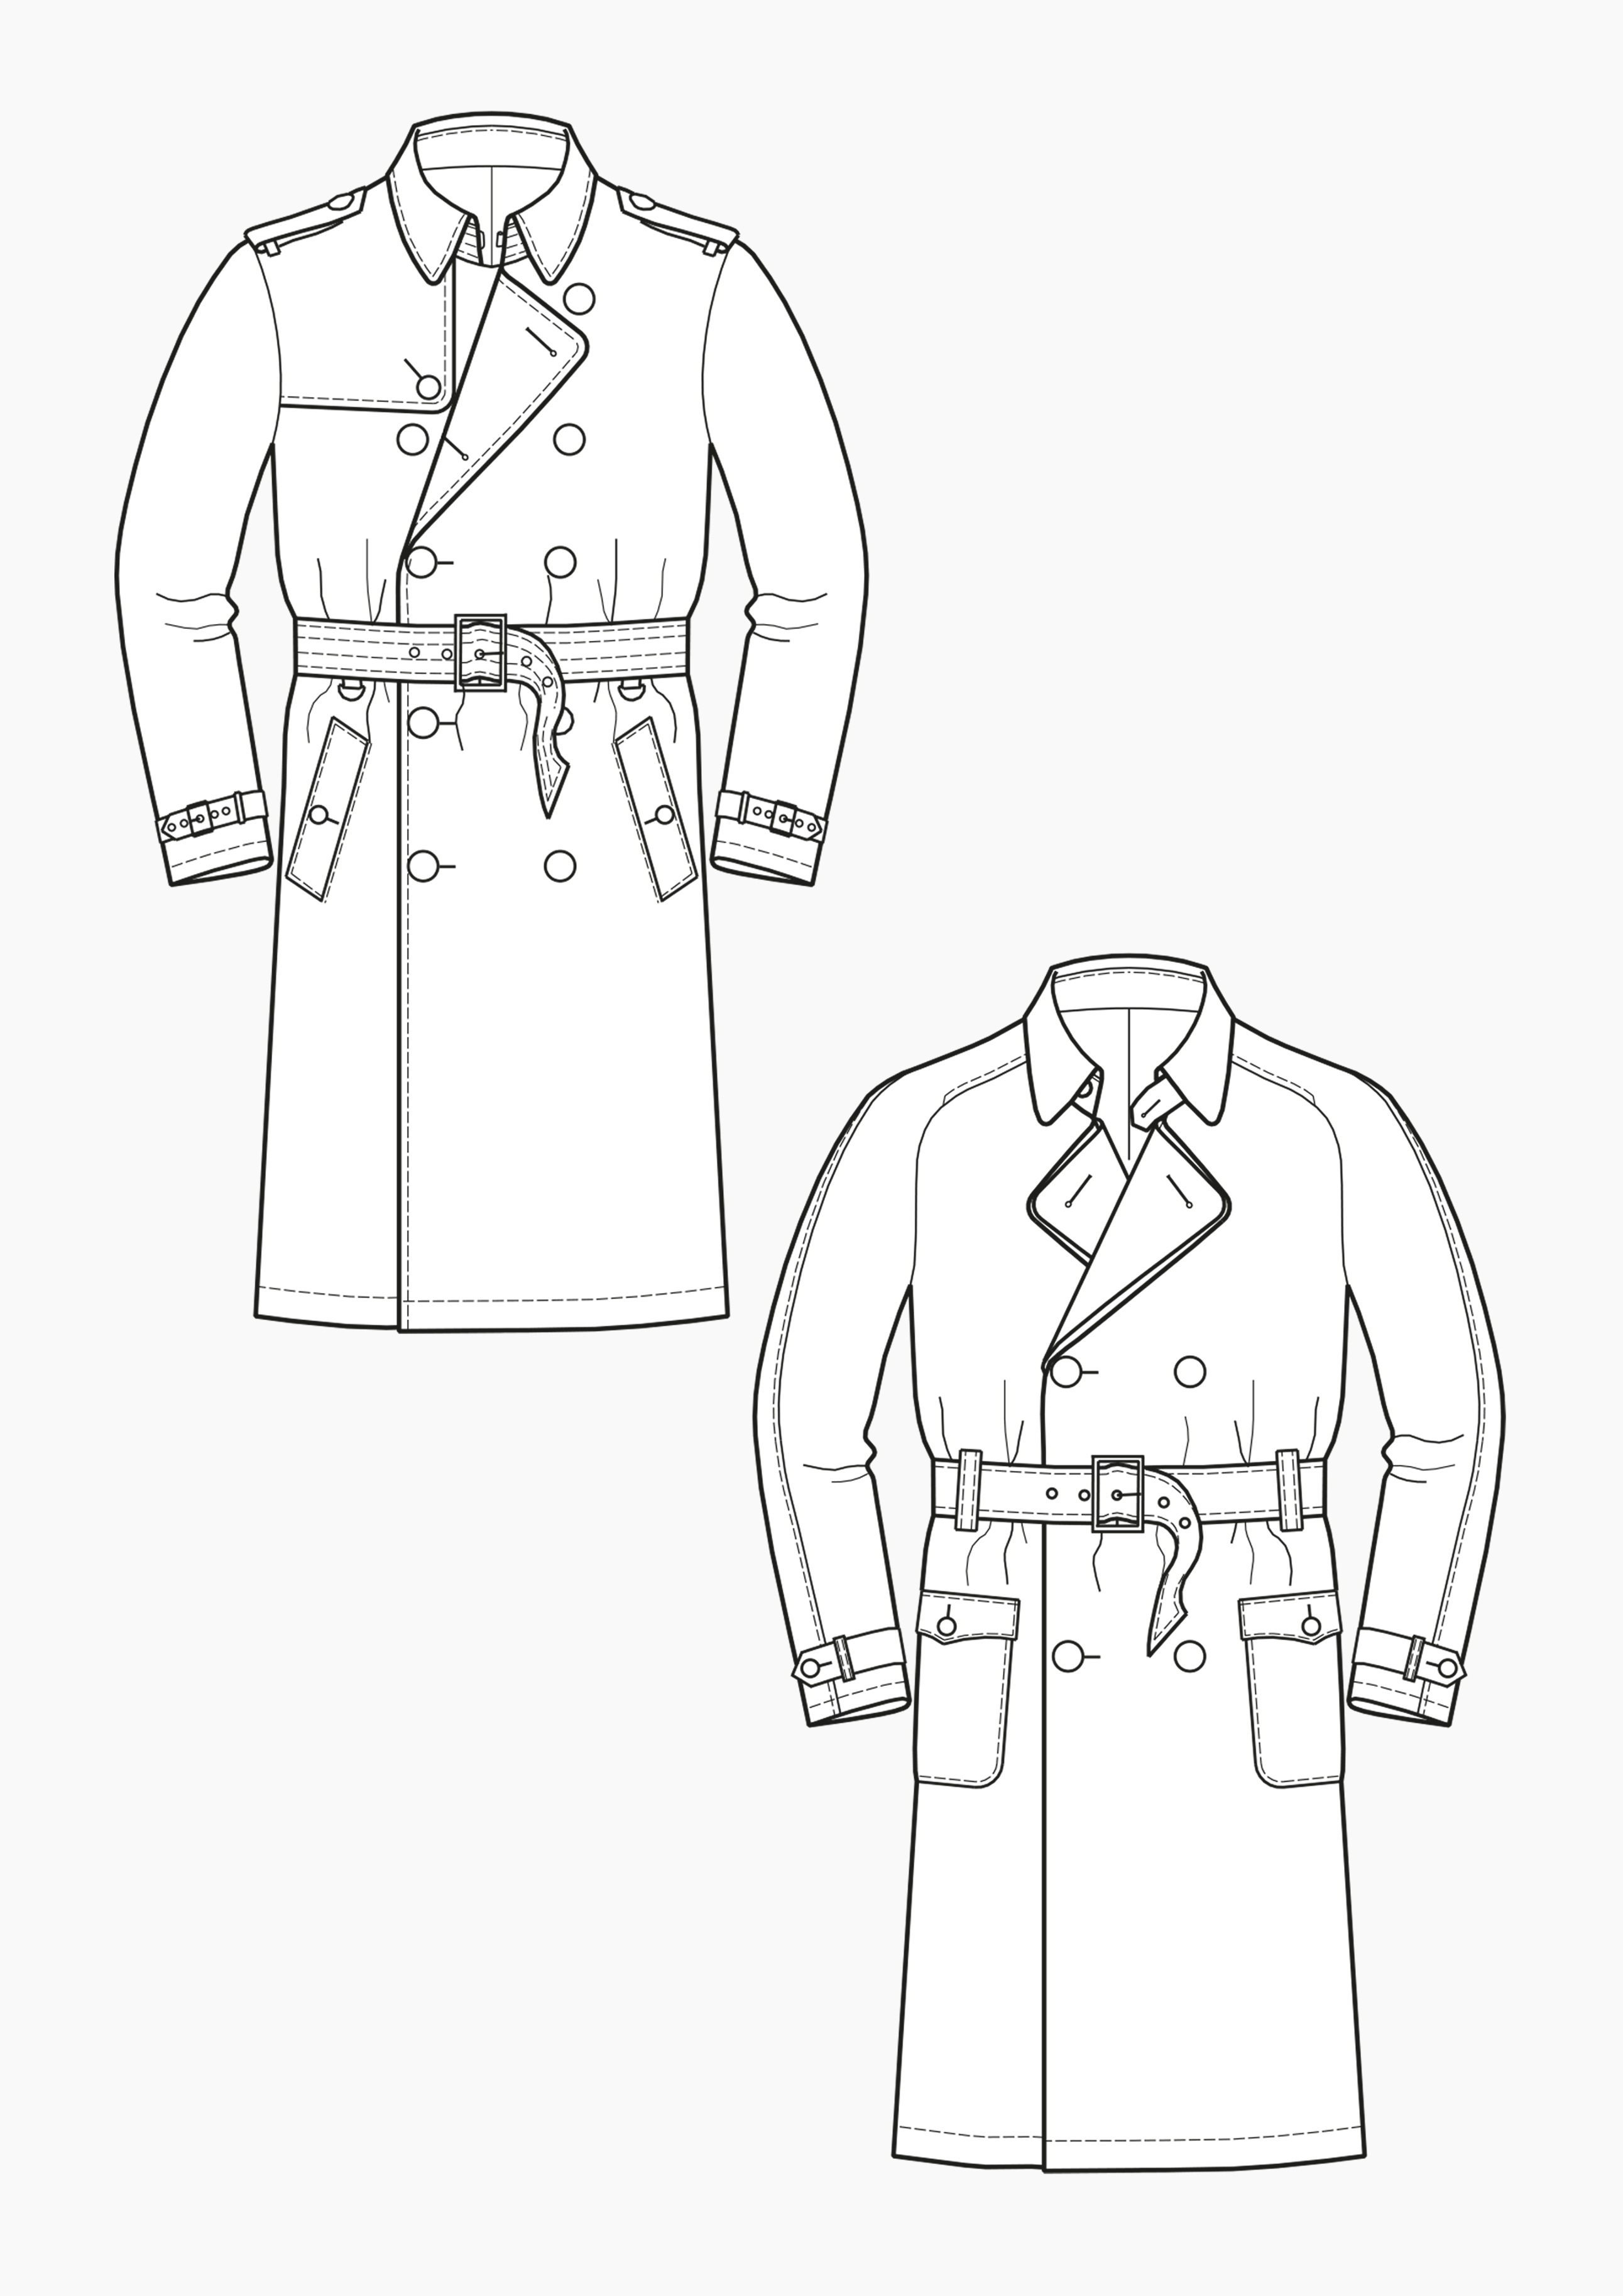 Product: Pattern Making Trenchcoats for Men